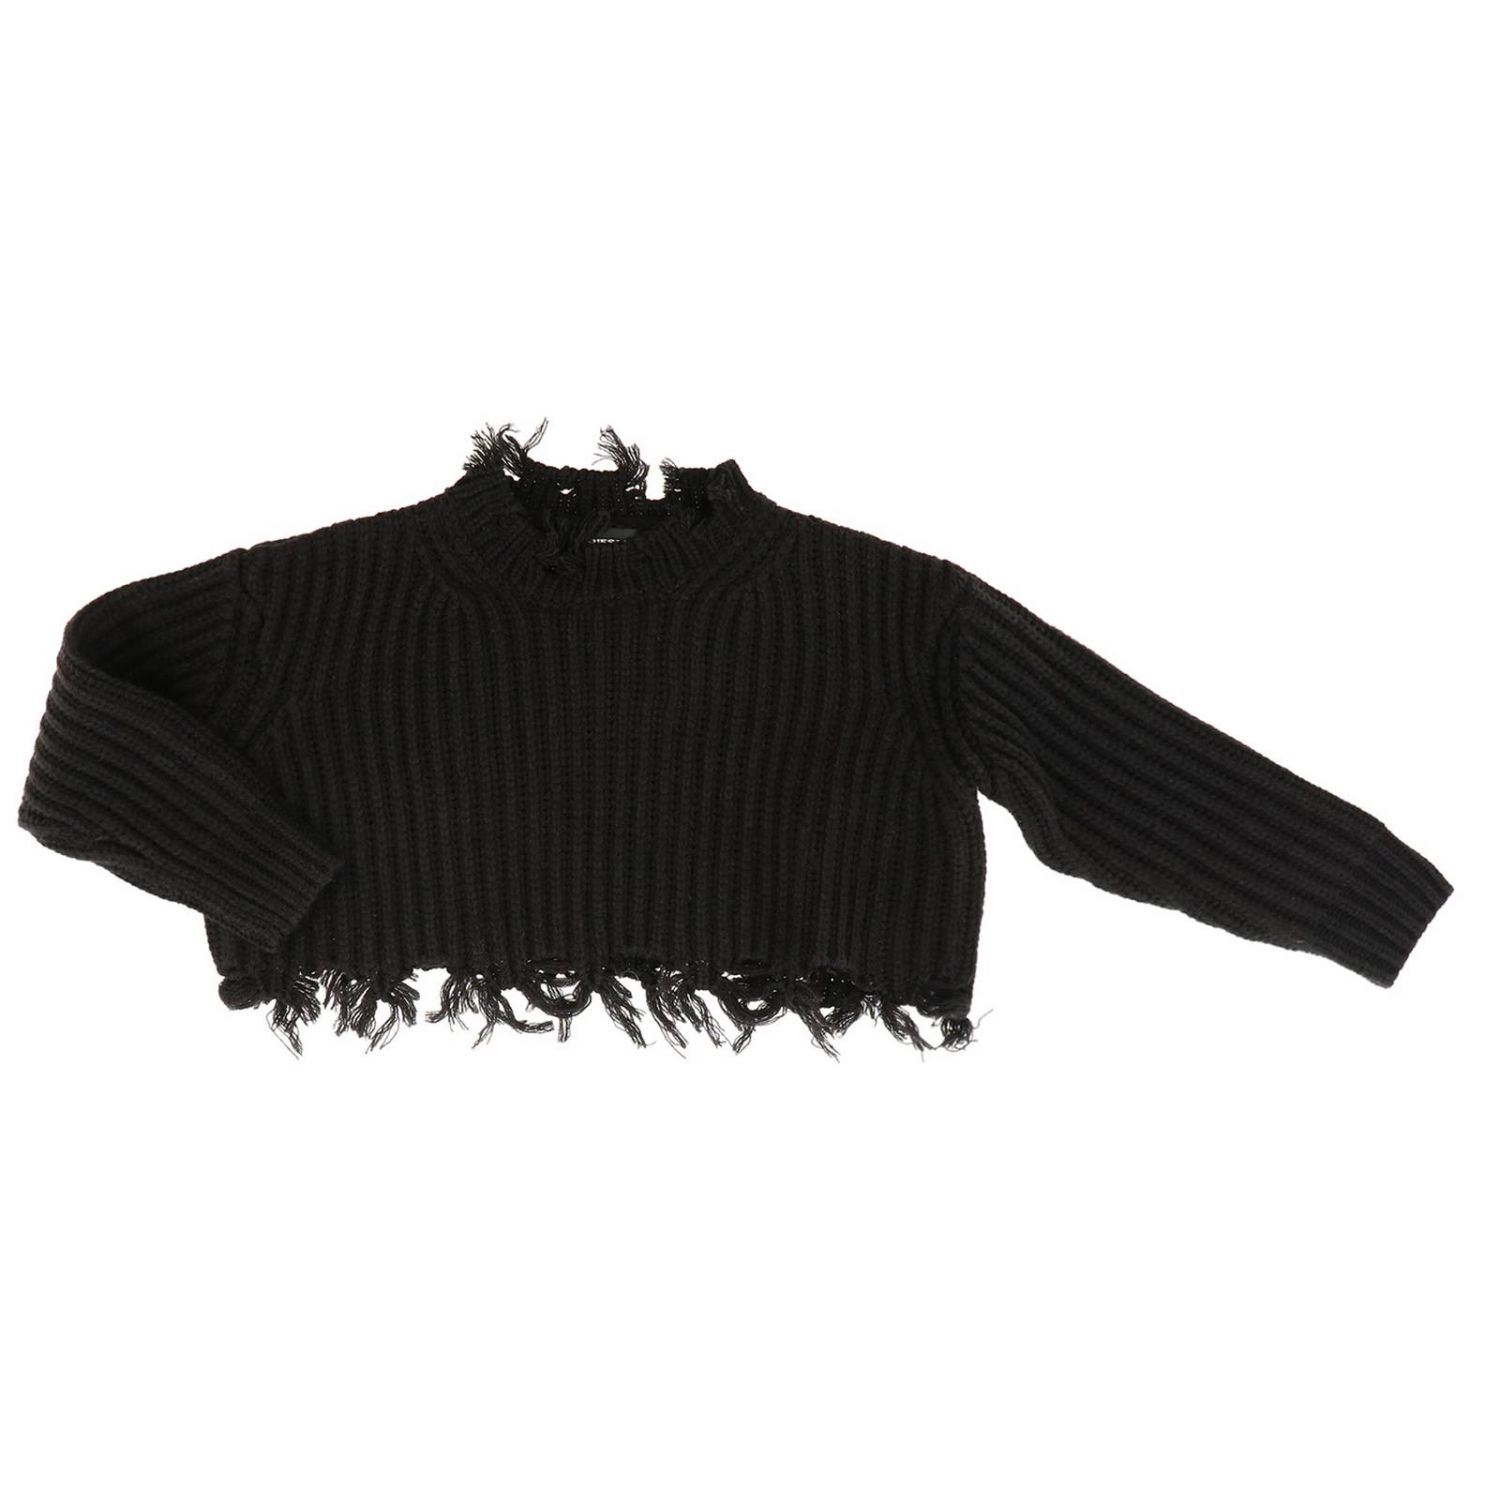 Diesel Outlet: cropped pullover with fringed edges - Black | Diesel ...